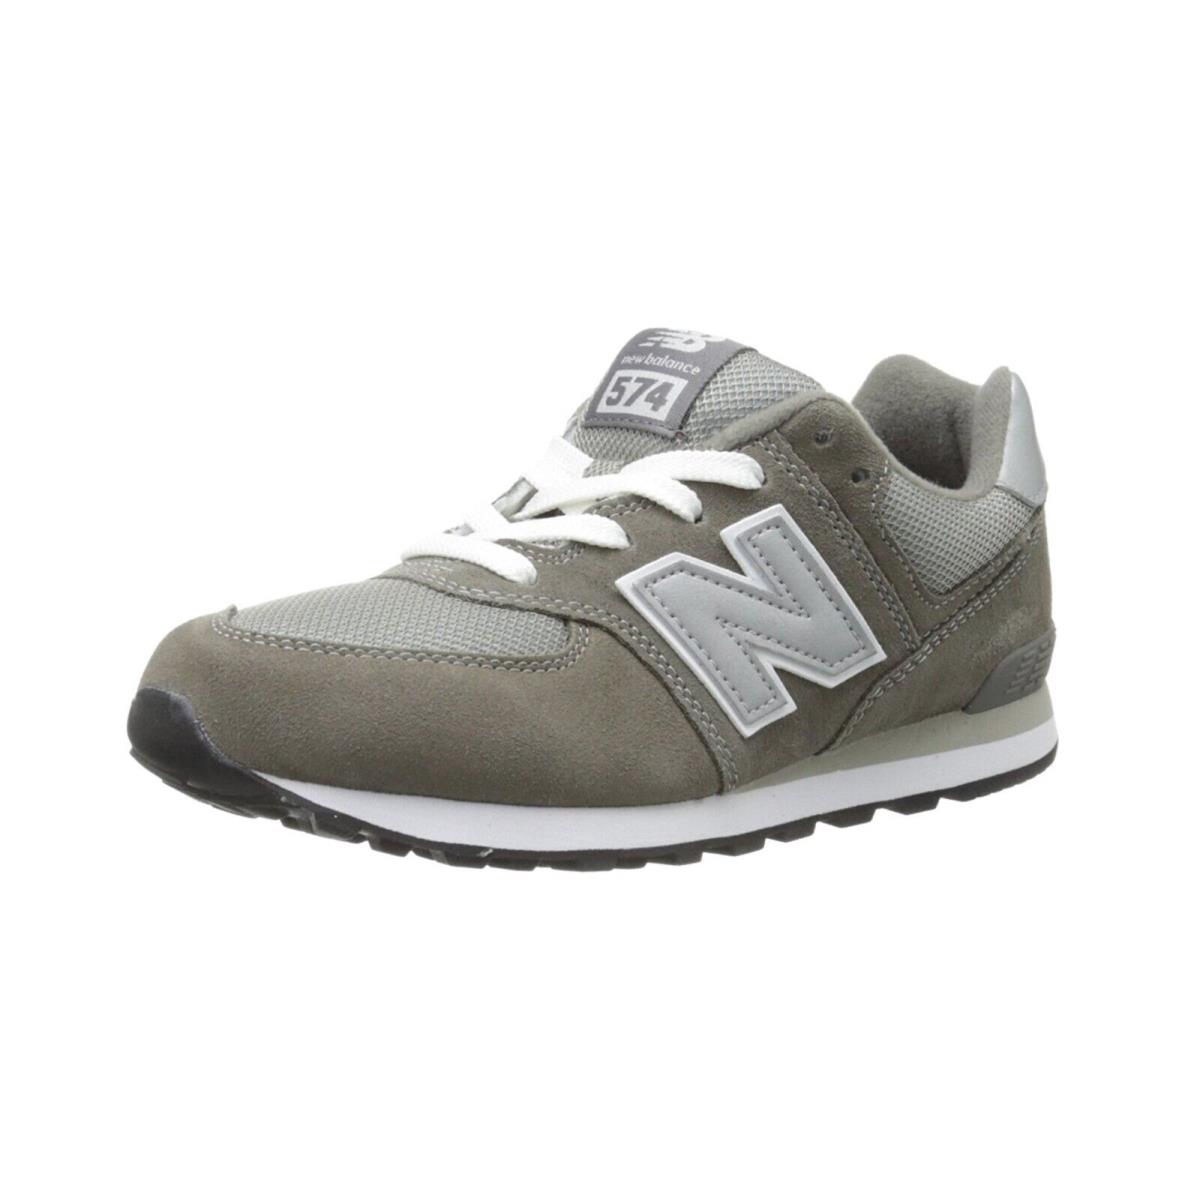 New Balance 574 Big Kids Running Shoes Sneakers KL574GSG - Grey/white